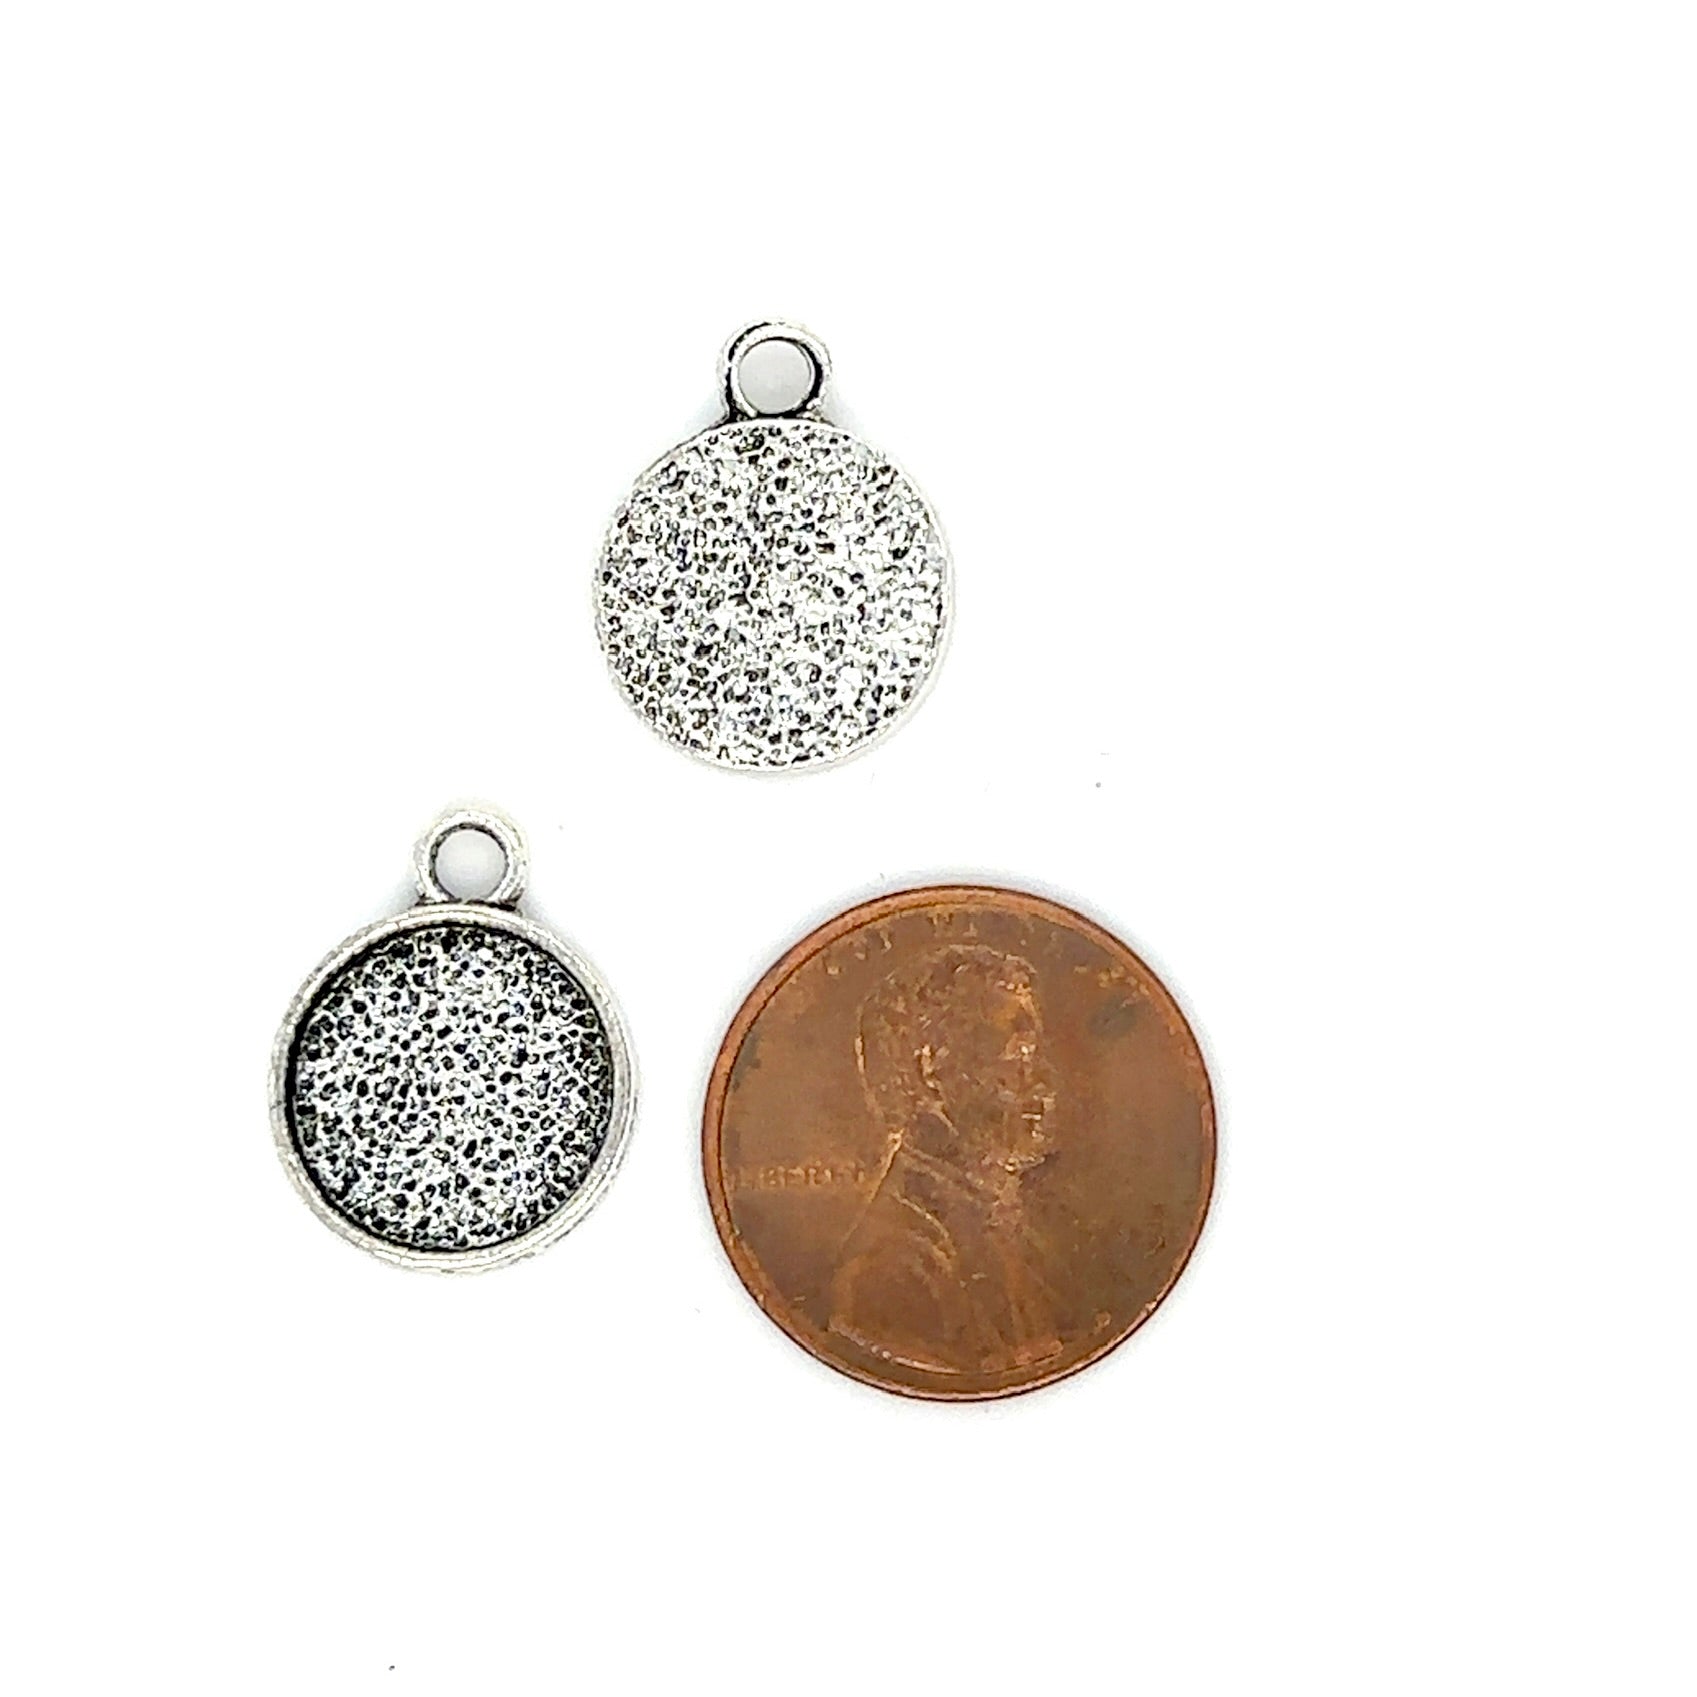 12mm small round jewelry making supplies charm antique silver